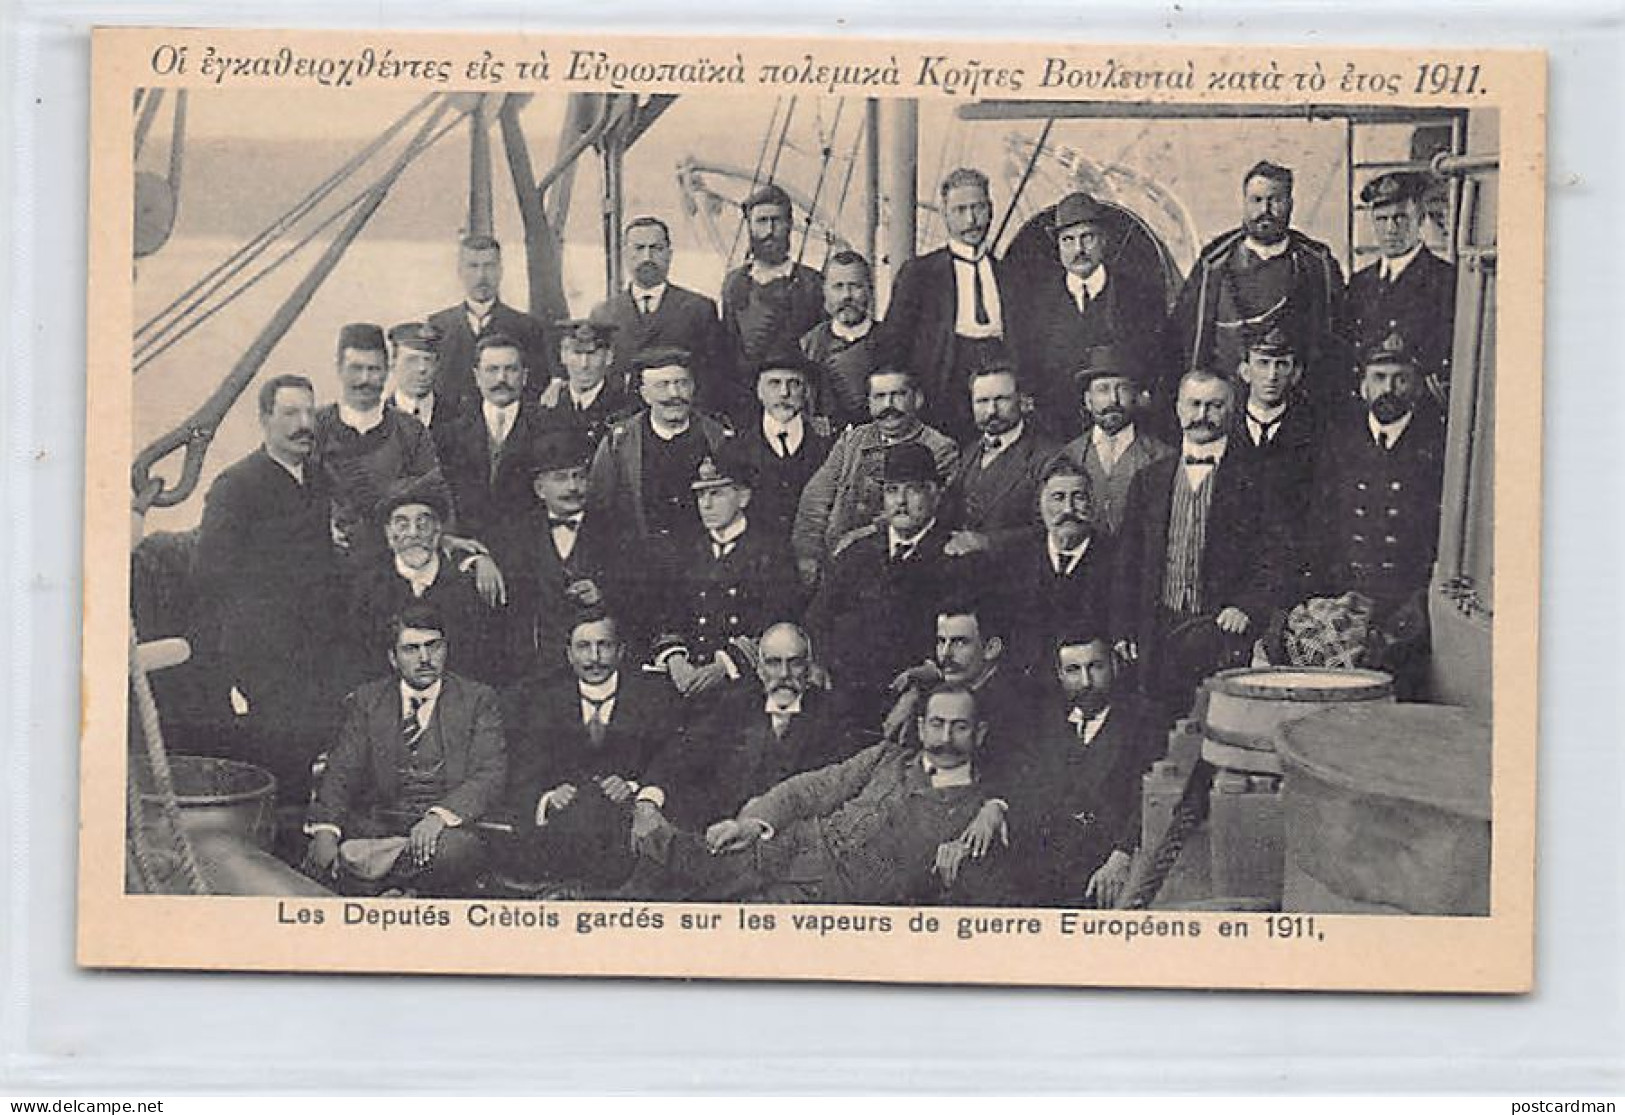 Crete - The Cretan Members Of Parliament Guarded Onboard Of The European Warships In 1911 - Publ. N. Alikiotis 346 - Greece